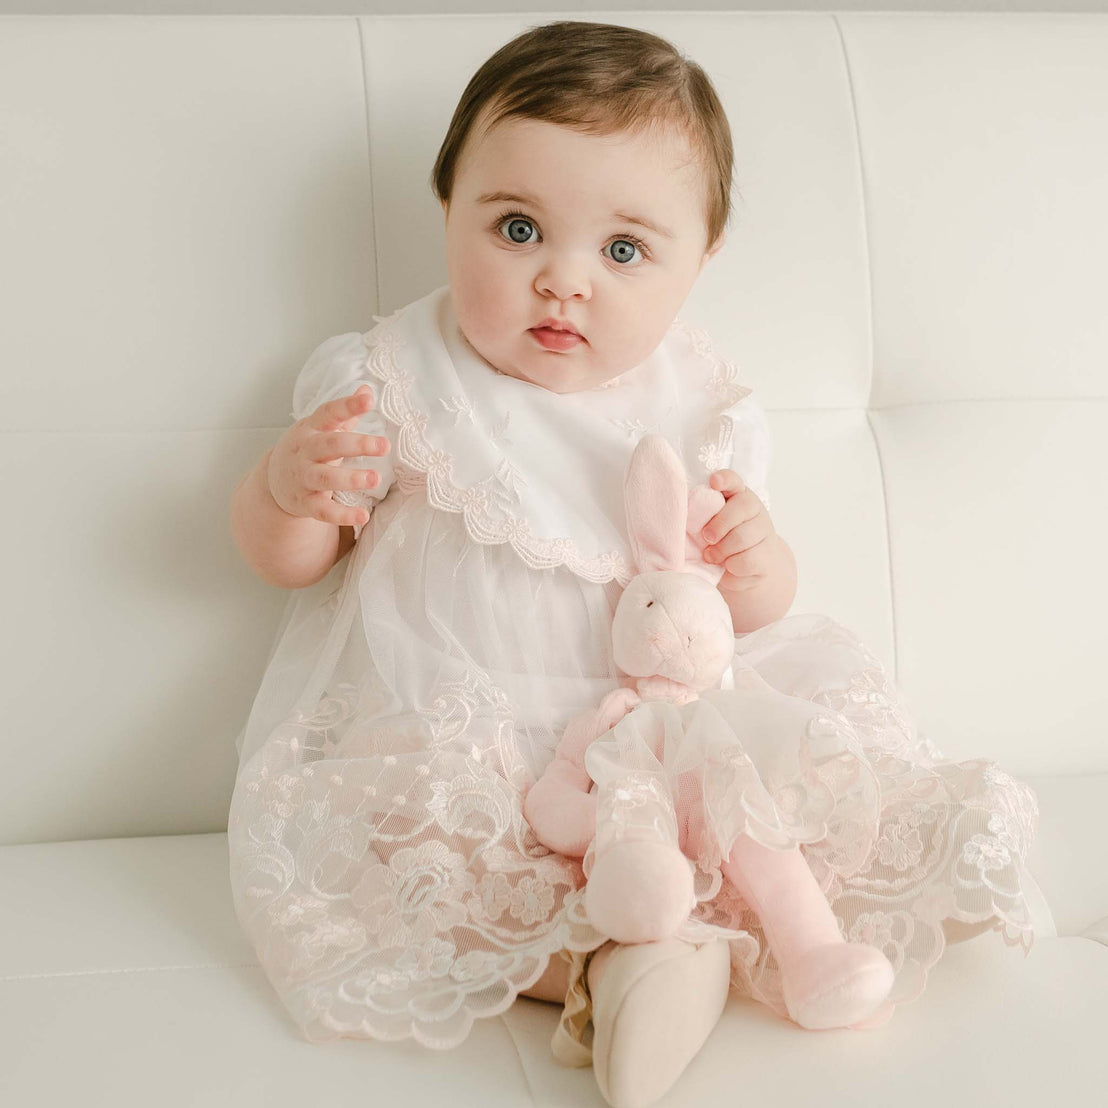 A baby with big blue eyes, wearing a delicate white lace dress, sits on a sofa holding a Joli Silly Bunny Buddy Pacifier Holder.